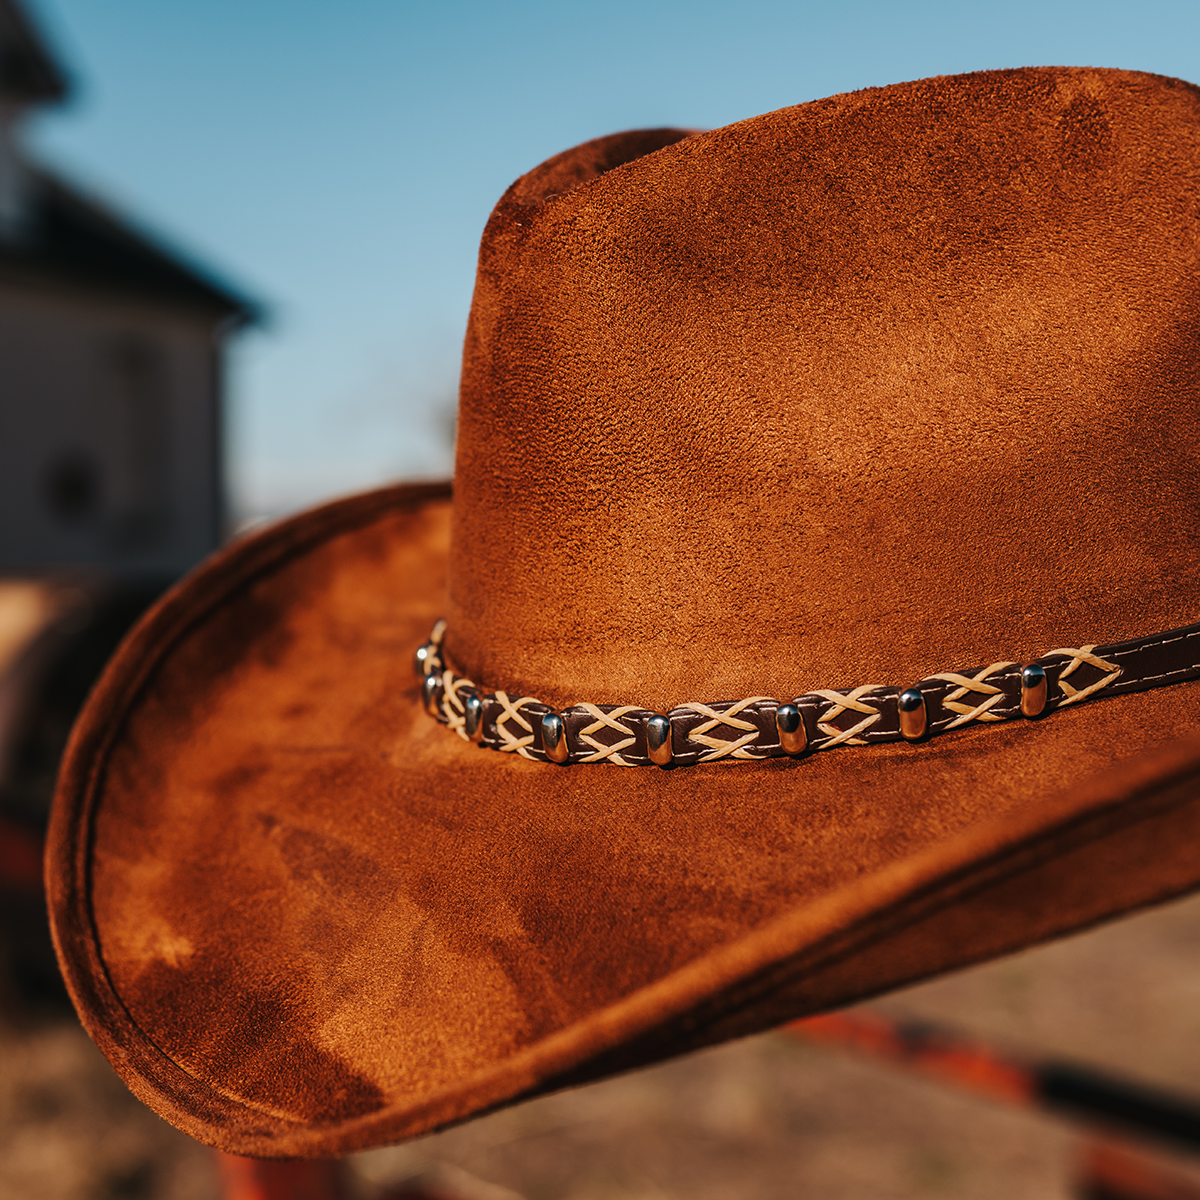 FREEBIRD Jones rust western cowboy hat featuring teardrop crown, upturned-brim, and braided leather band detailed view